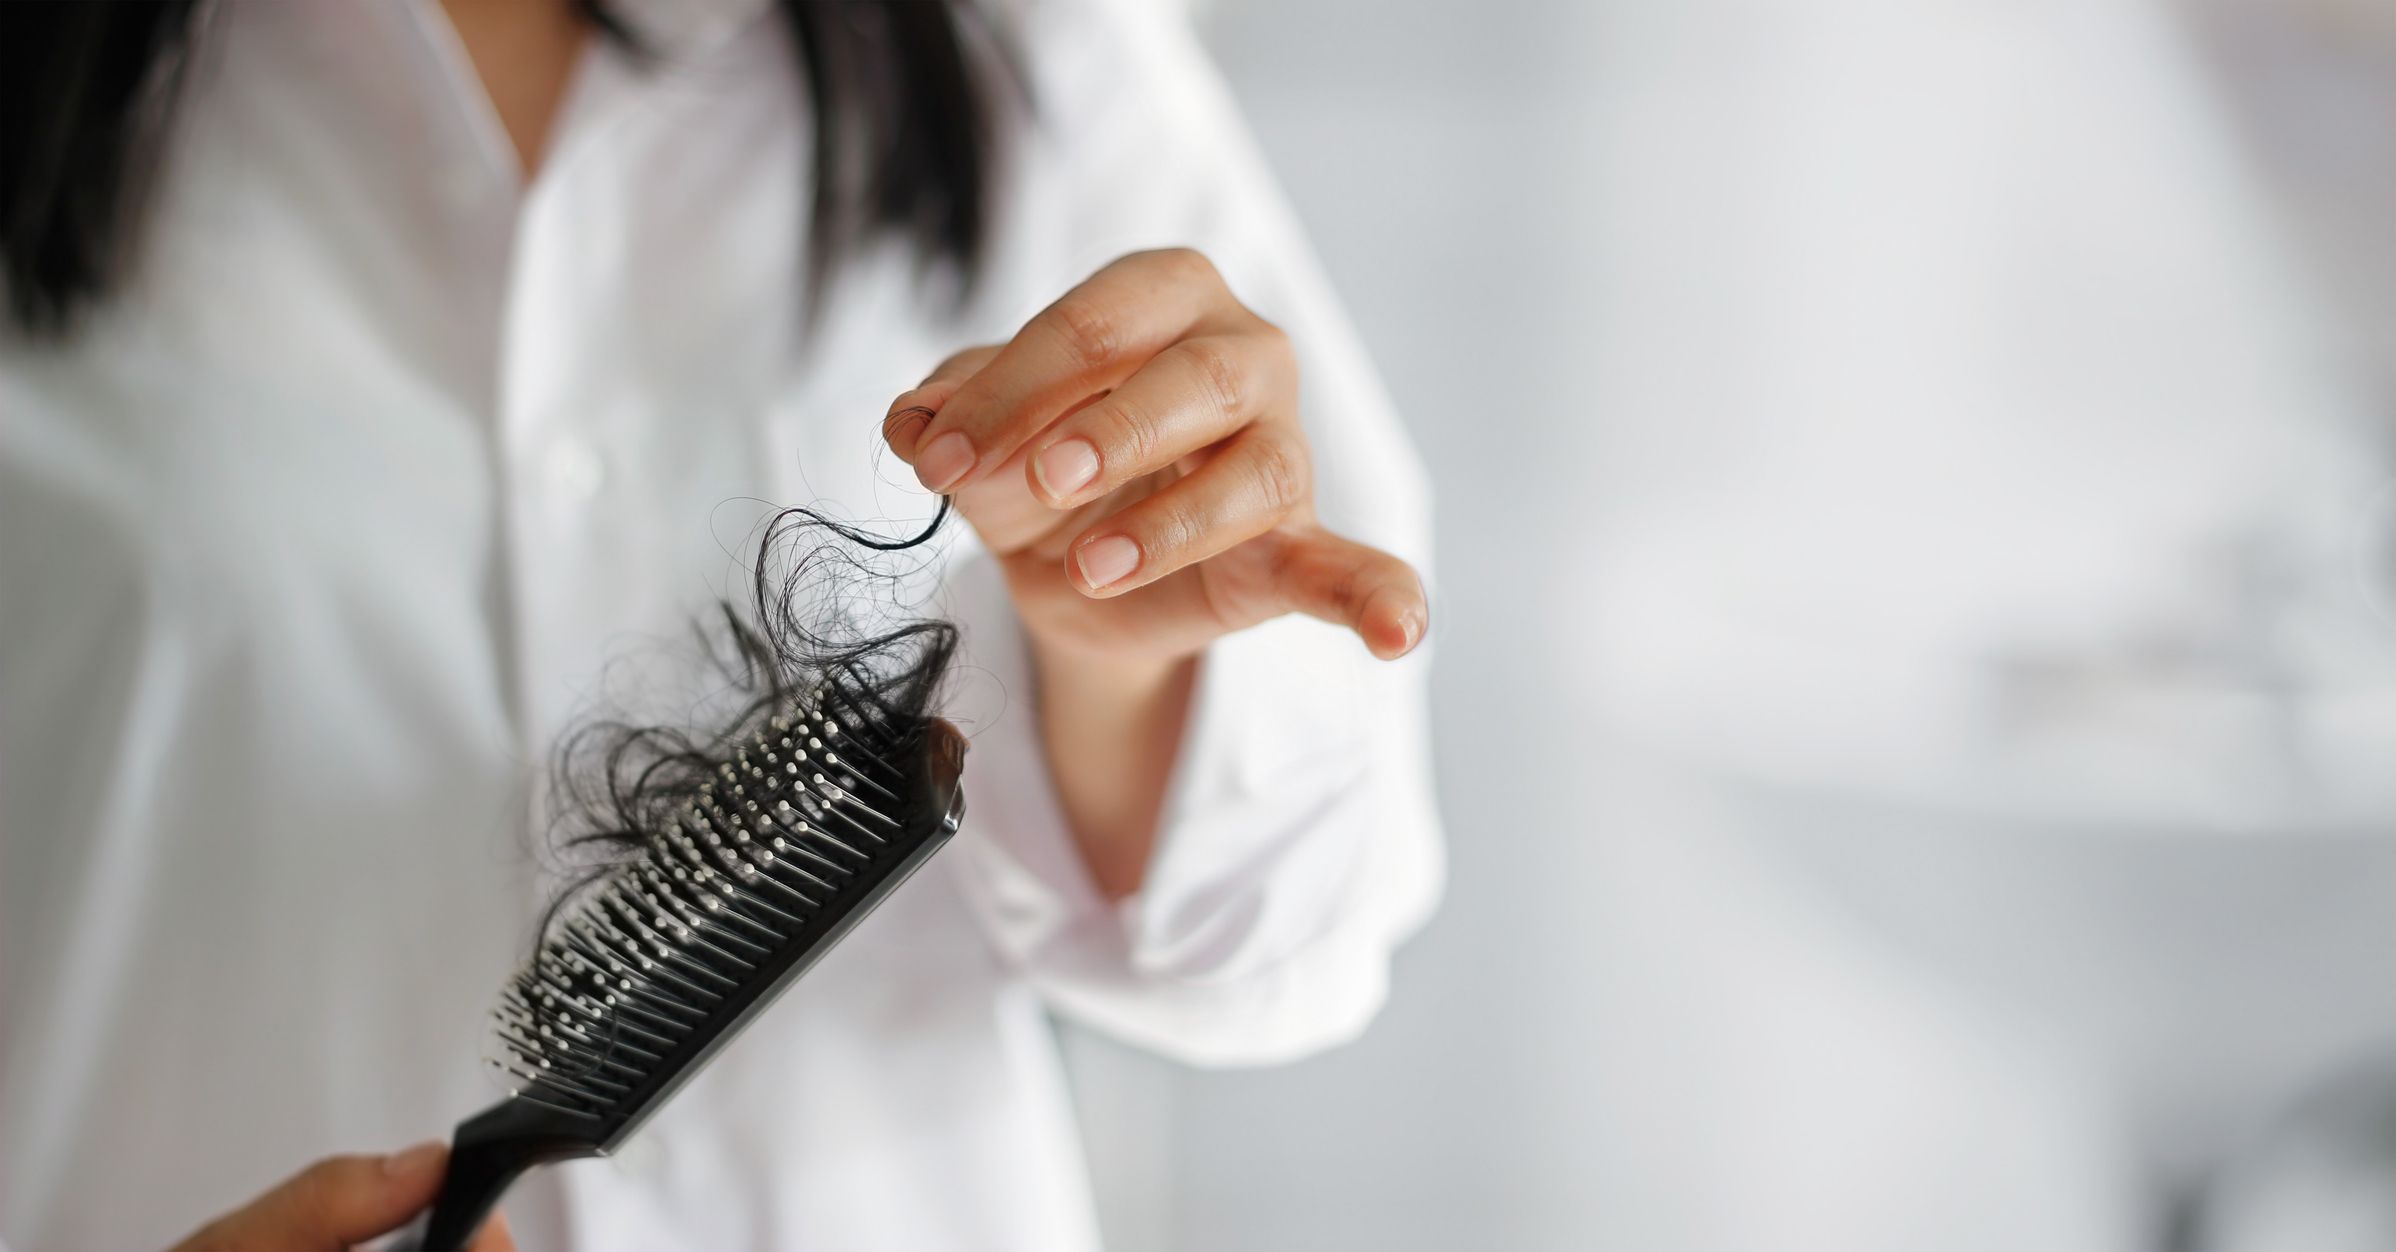 Hair loss solutions and best hairstyles for thinning hair